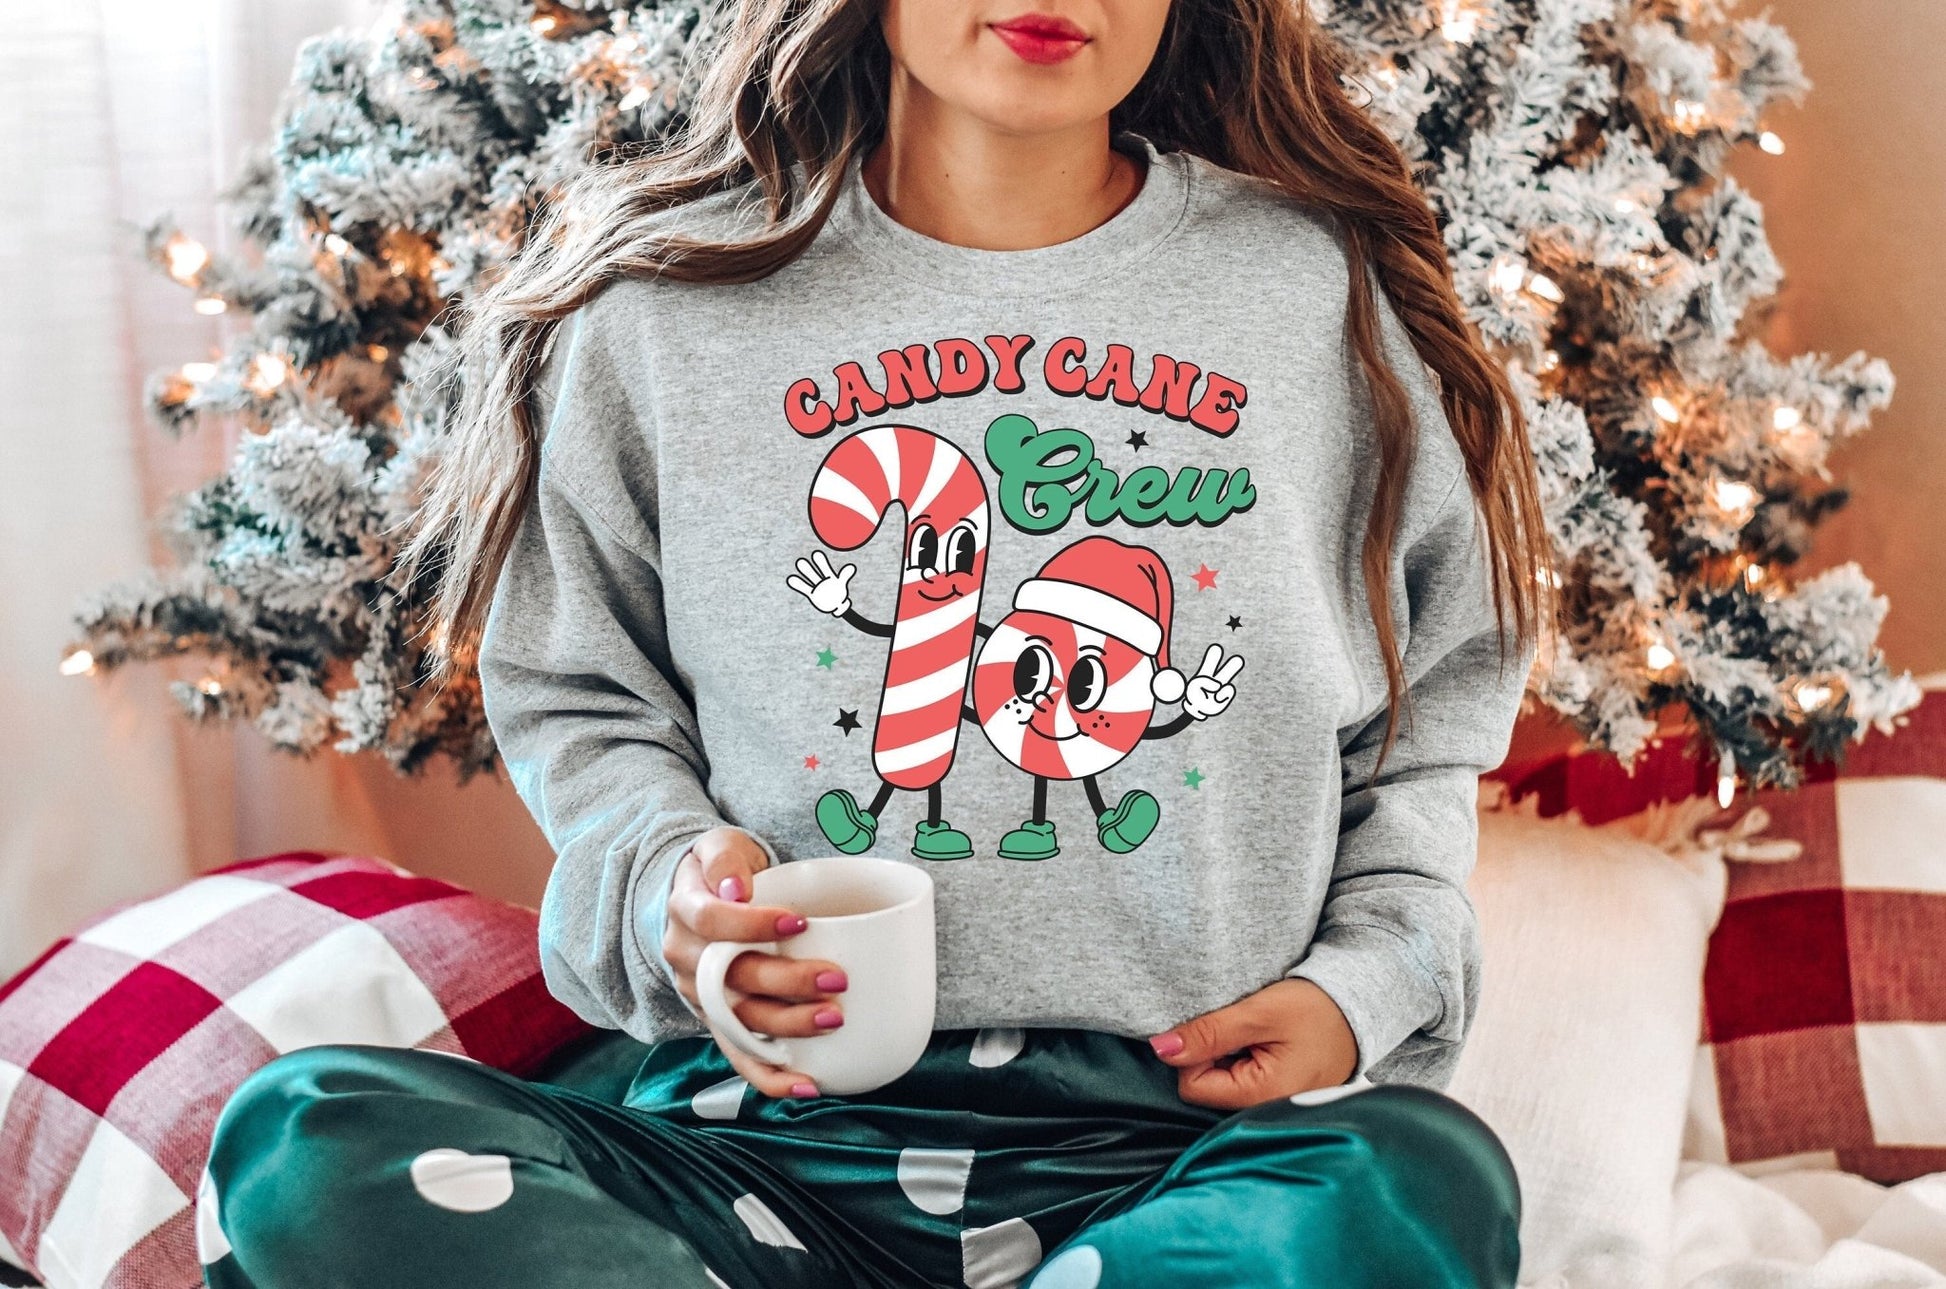 Woman's Candy Cane Christmas Crew Family Matching Shirts Sweatshirts Mommy and Me Candy Cane Crew - Squishy Cheeks